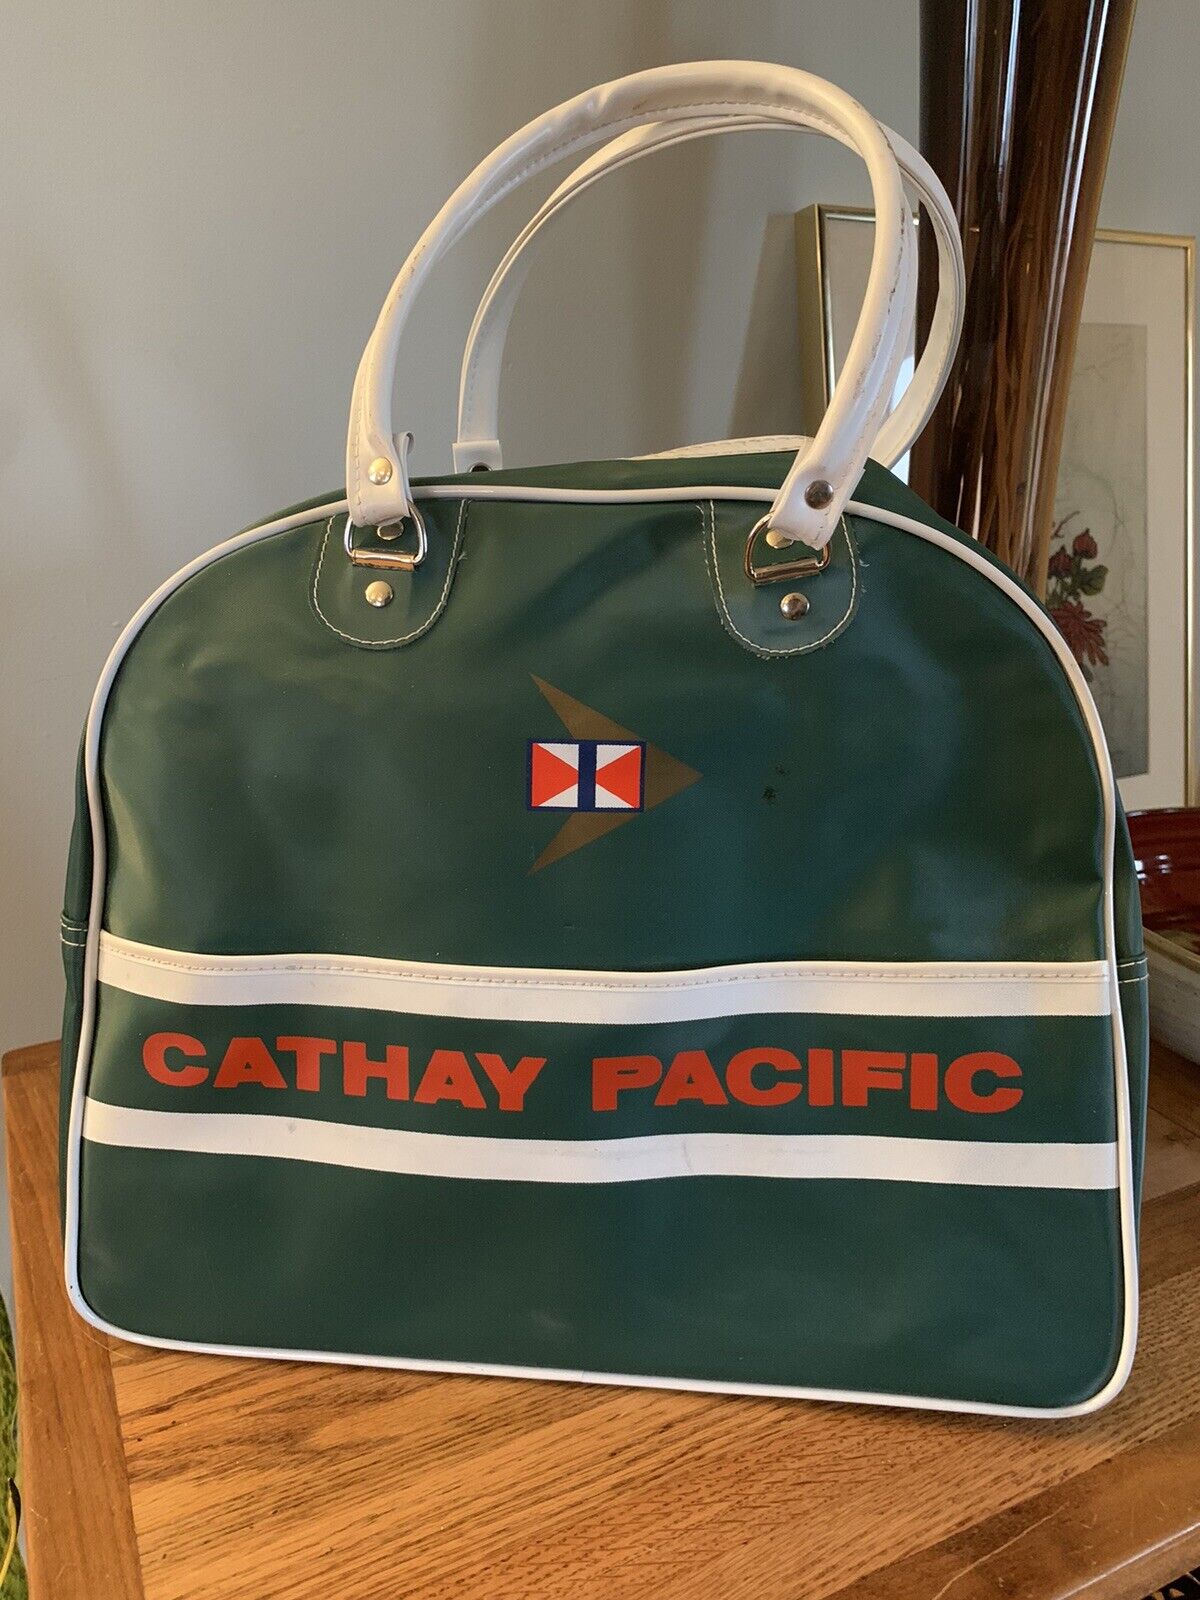 Vintage Cathay Pacific Airlines Carry On Travel Bag Luggage, Green